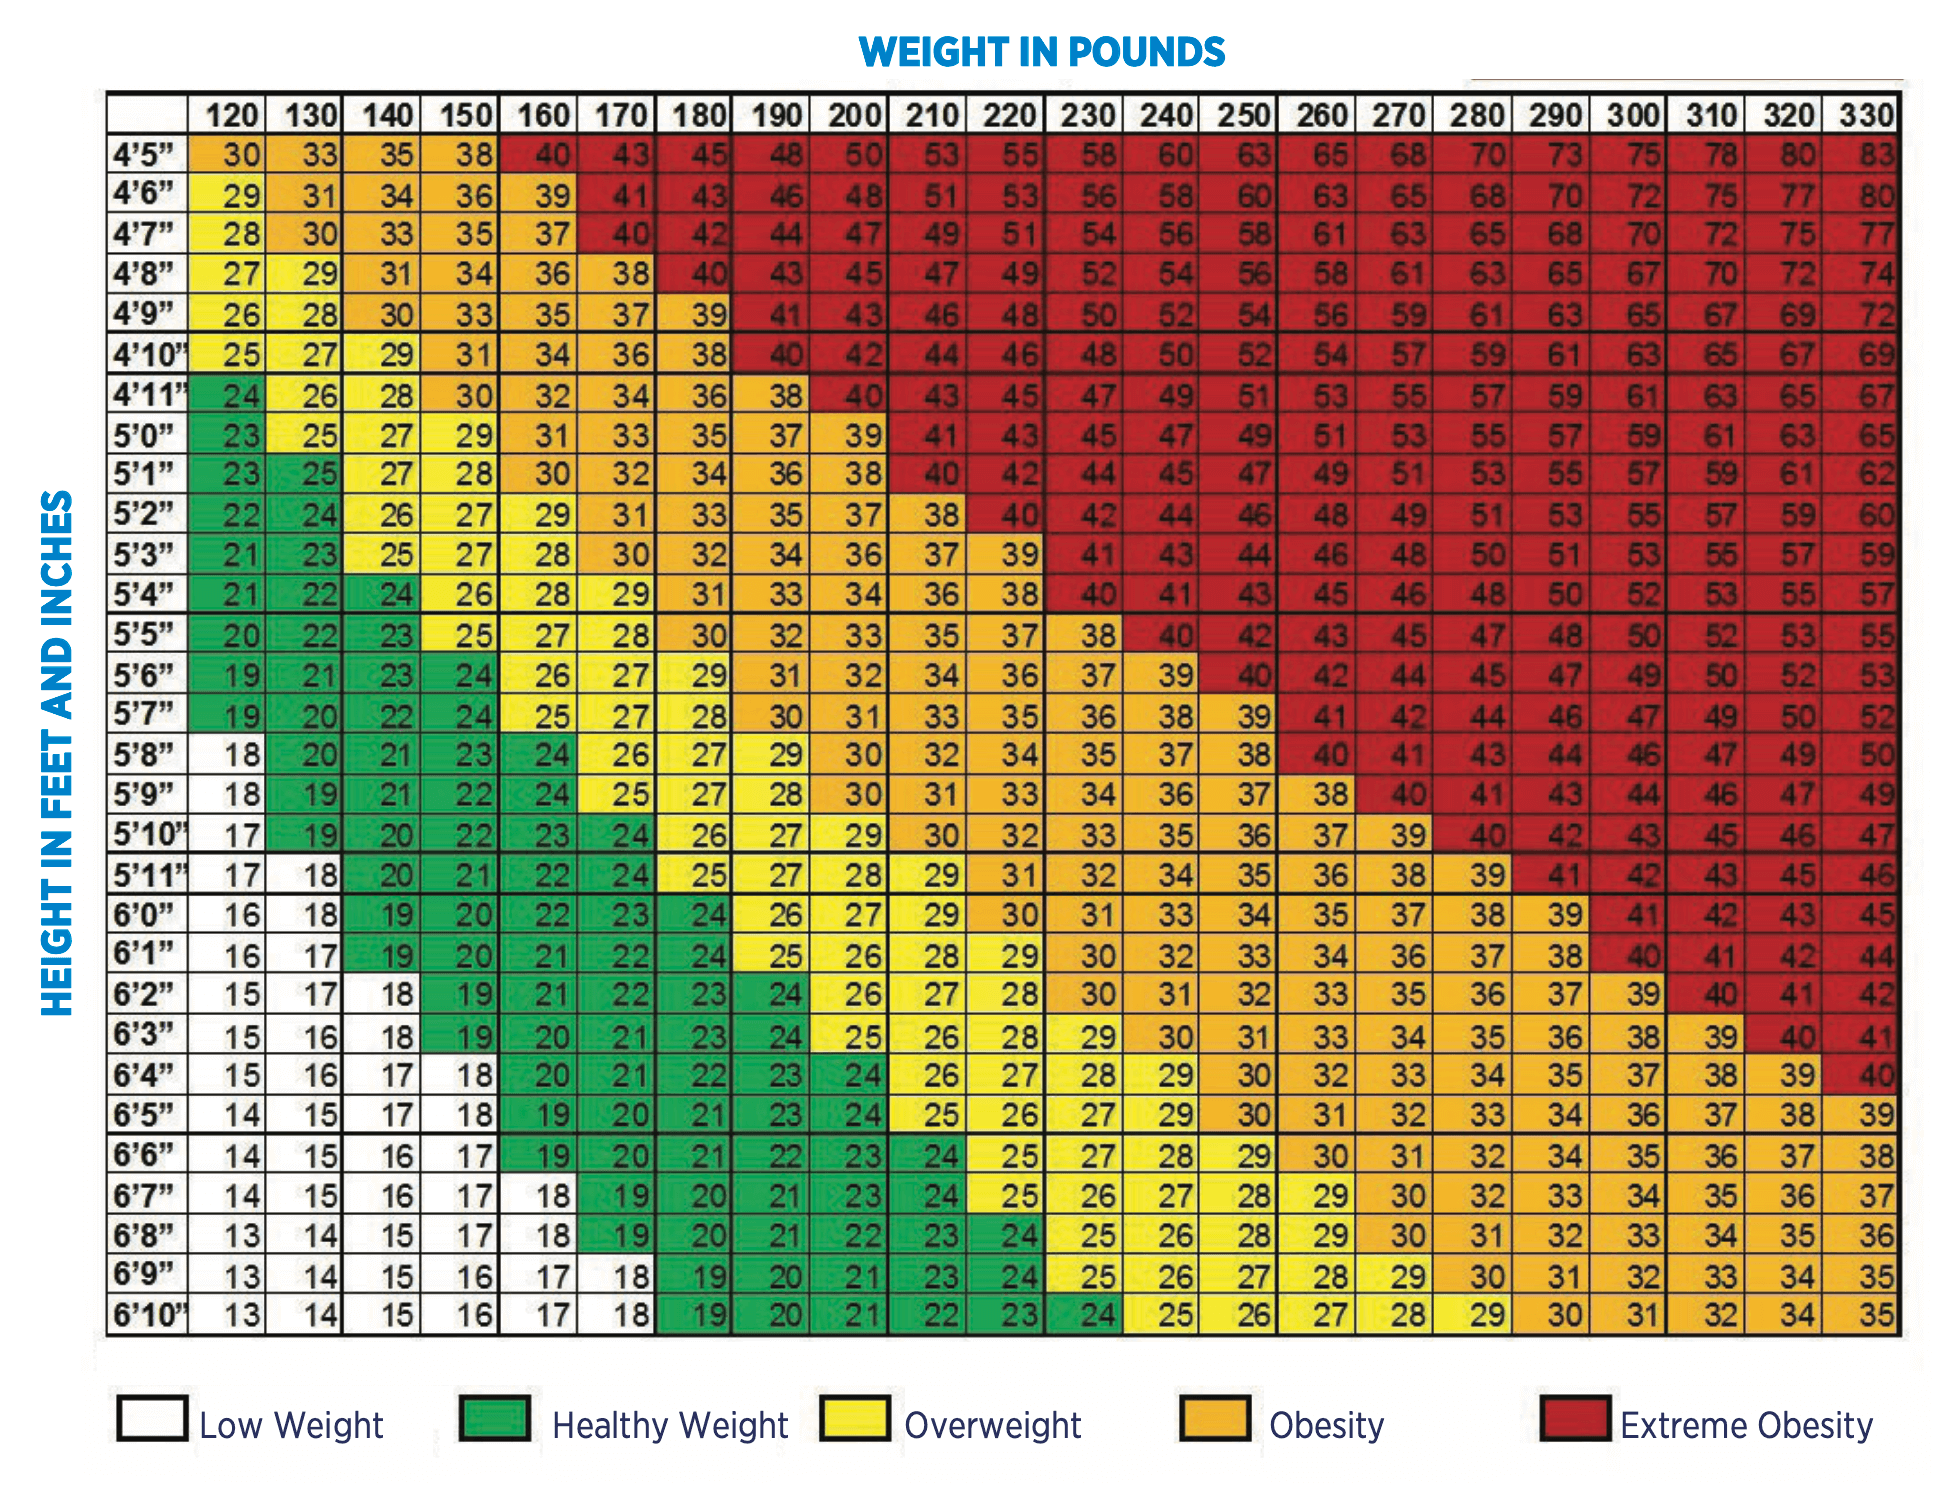 Obesity Table